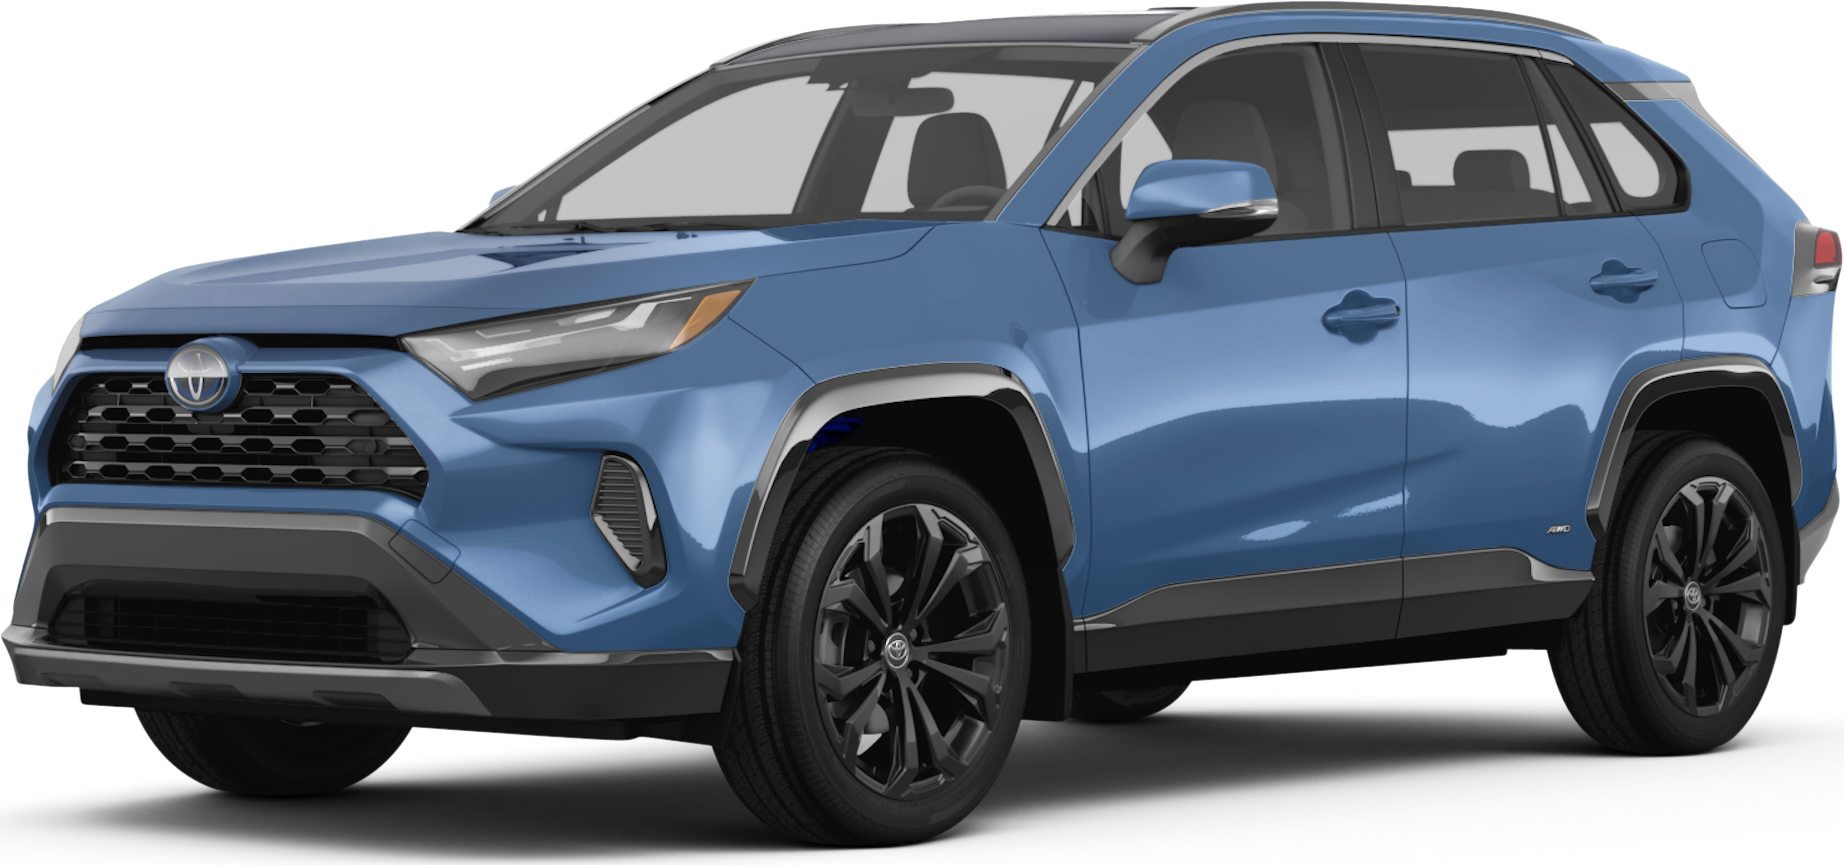 5 Toyota SUV Models To Consider Before Deciding On A Toyota New